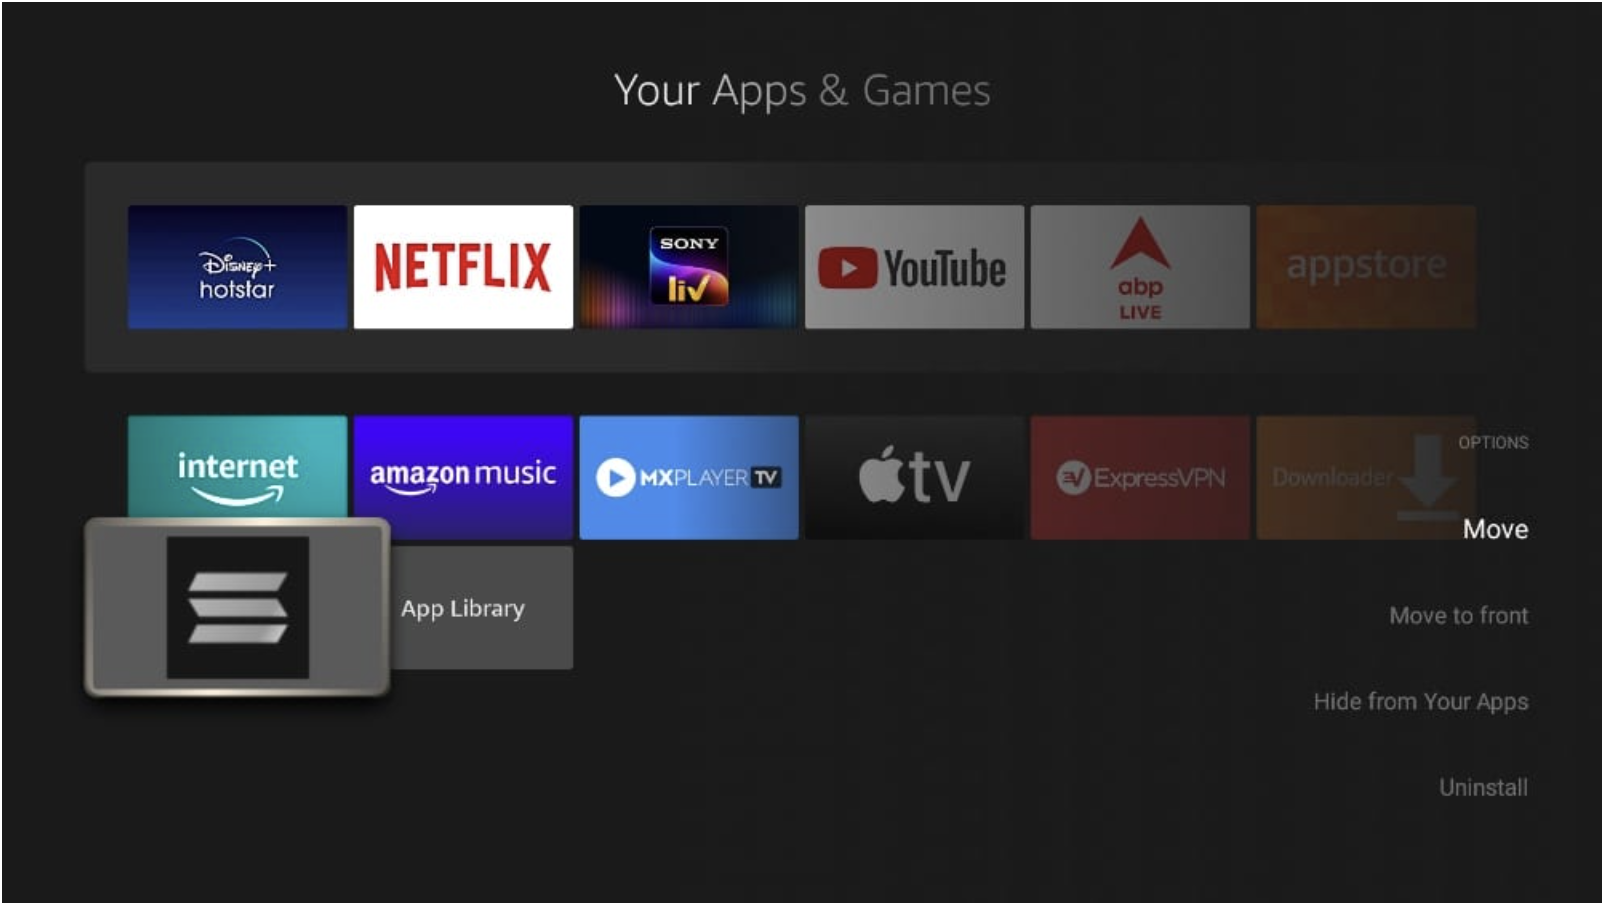 How to Access SS IPTV on FireStick